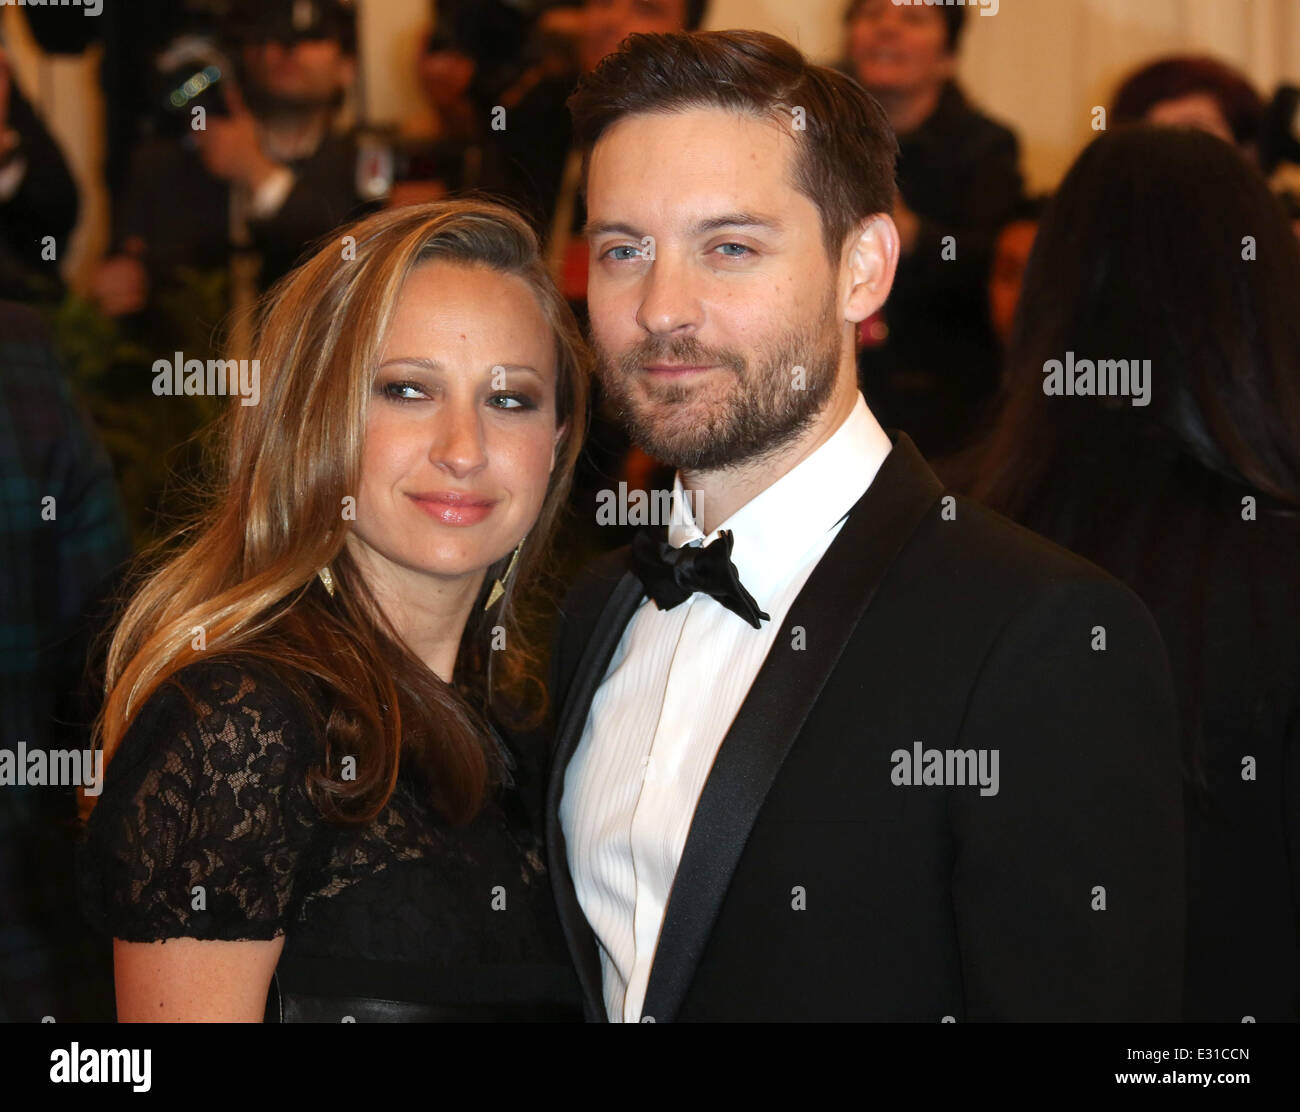 'PUNK: Chaos to Couture' Costume Institute Gala at The Metropolitan Museum of Art - Arrivals  Featuring: Tobey Maguire,Jennifer Stock Photo